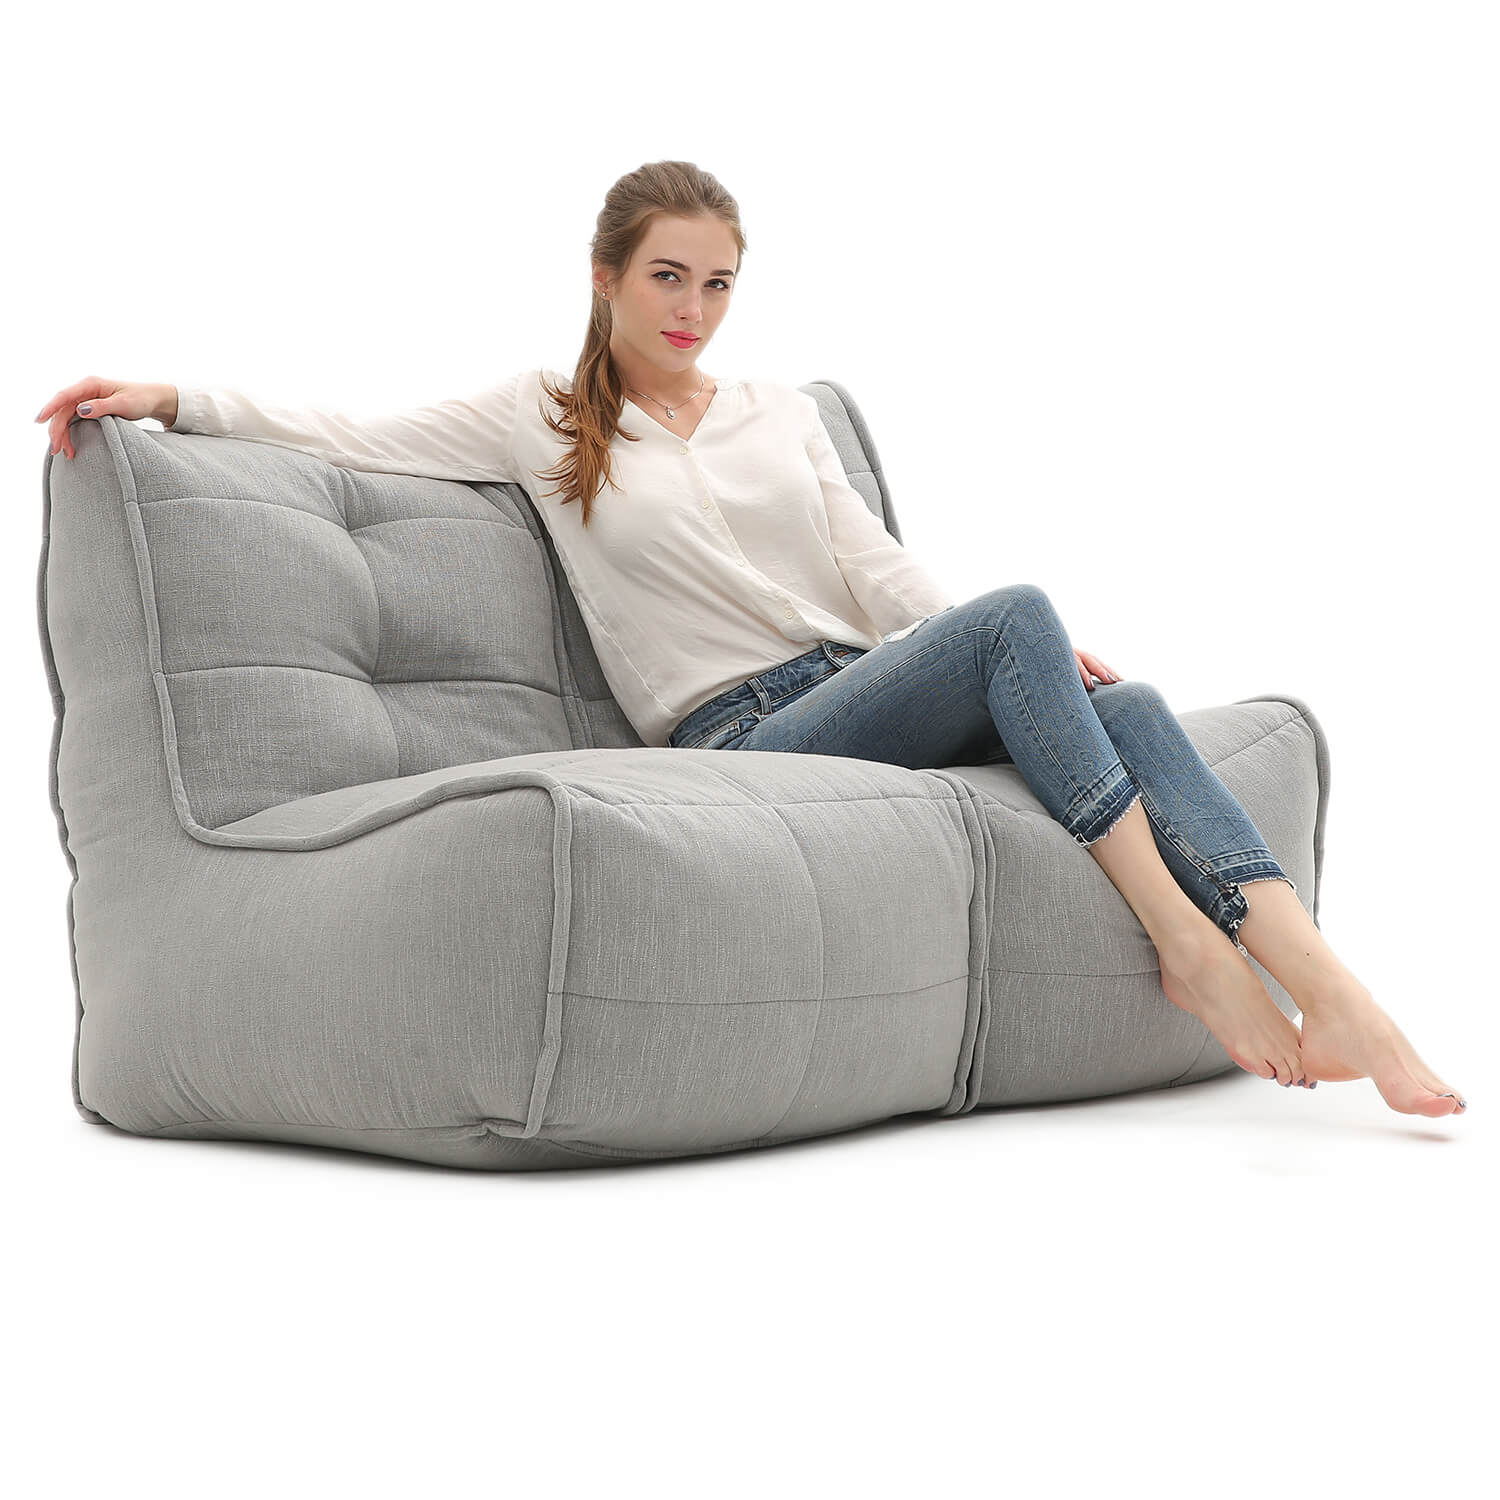 Double couch designer beanbag sofa in keystone gray with model PWCVYXN